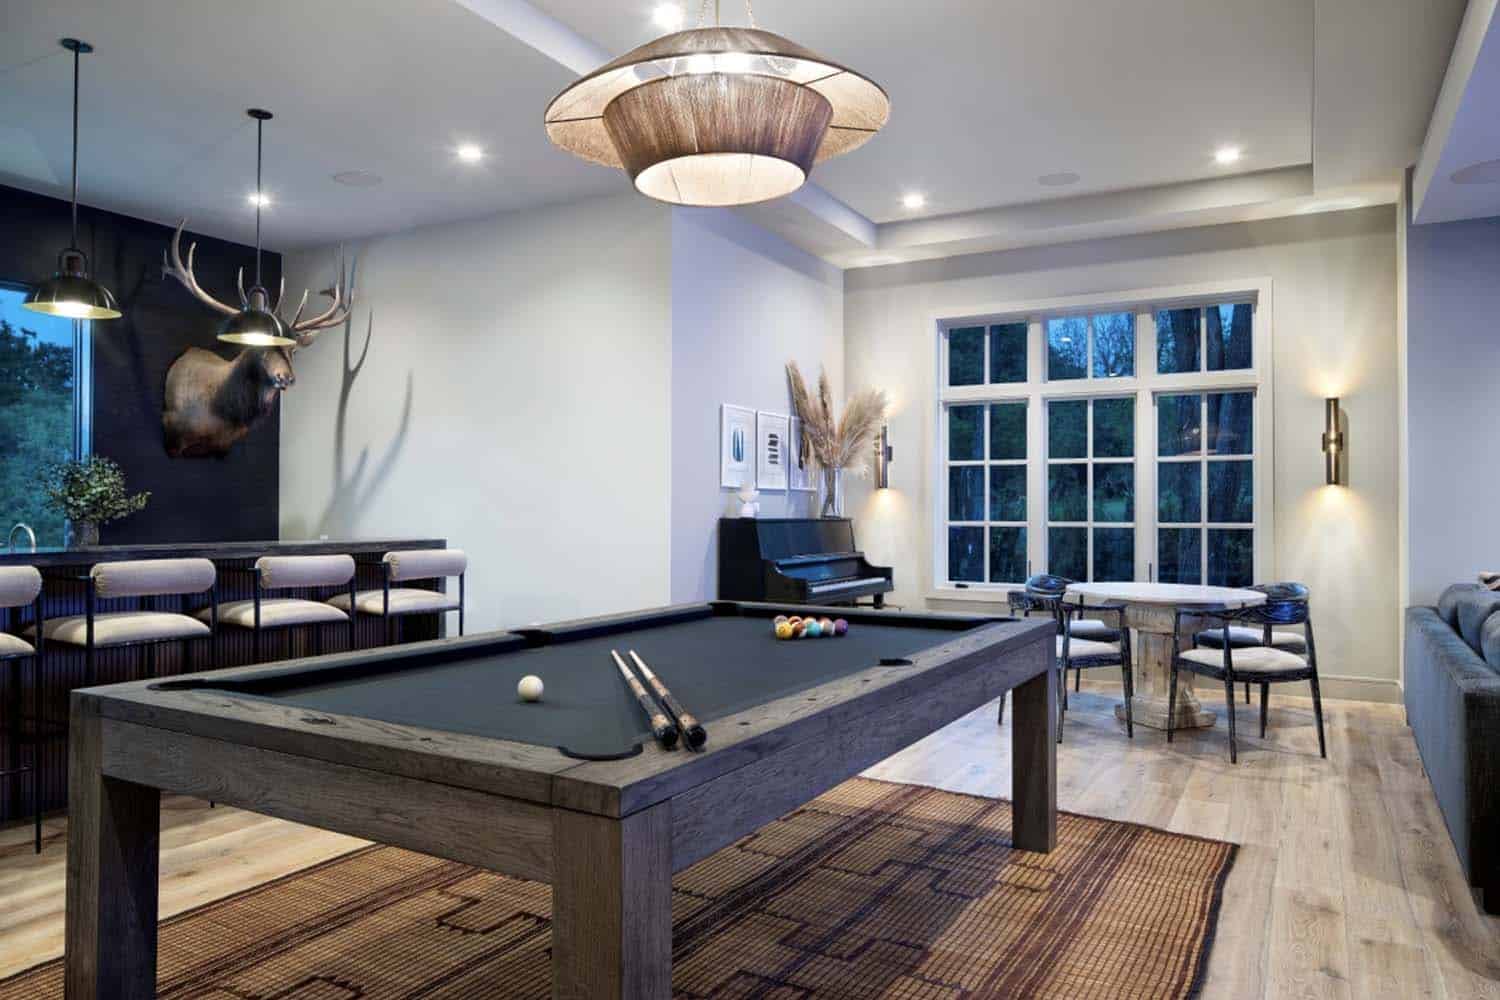 transitional style pool table